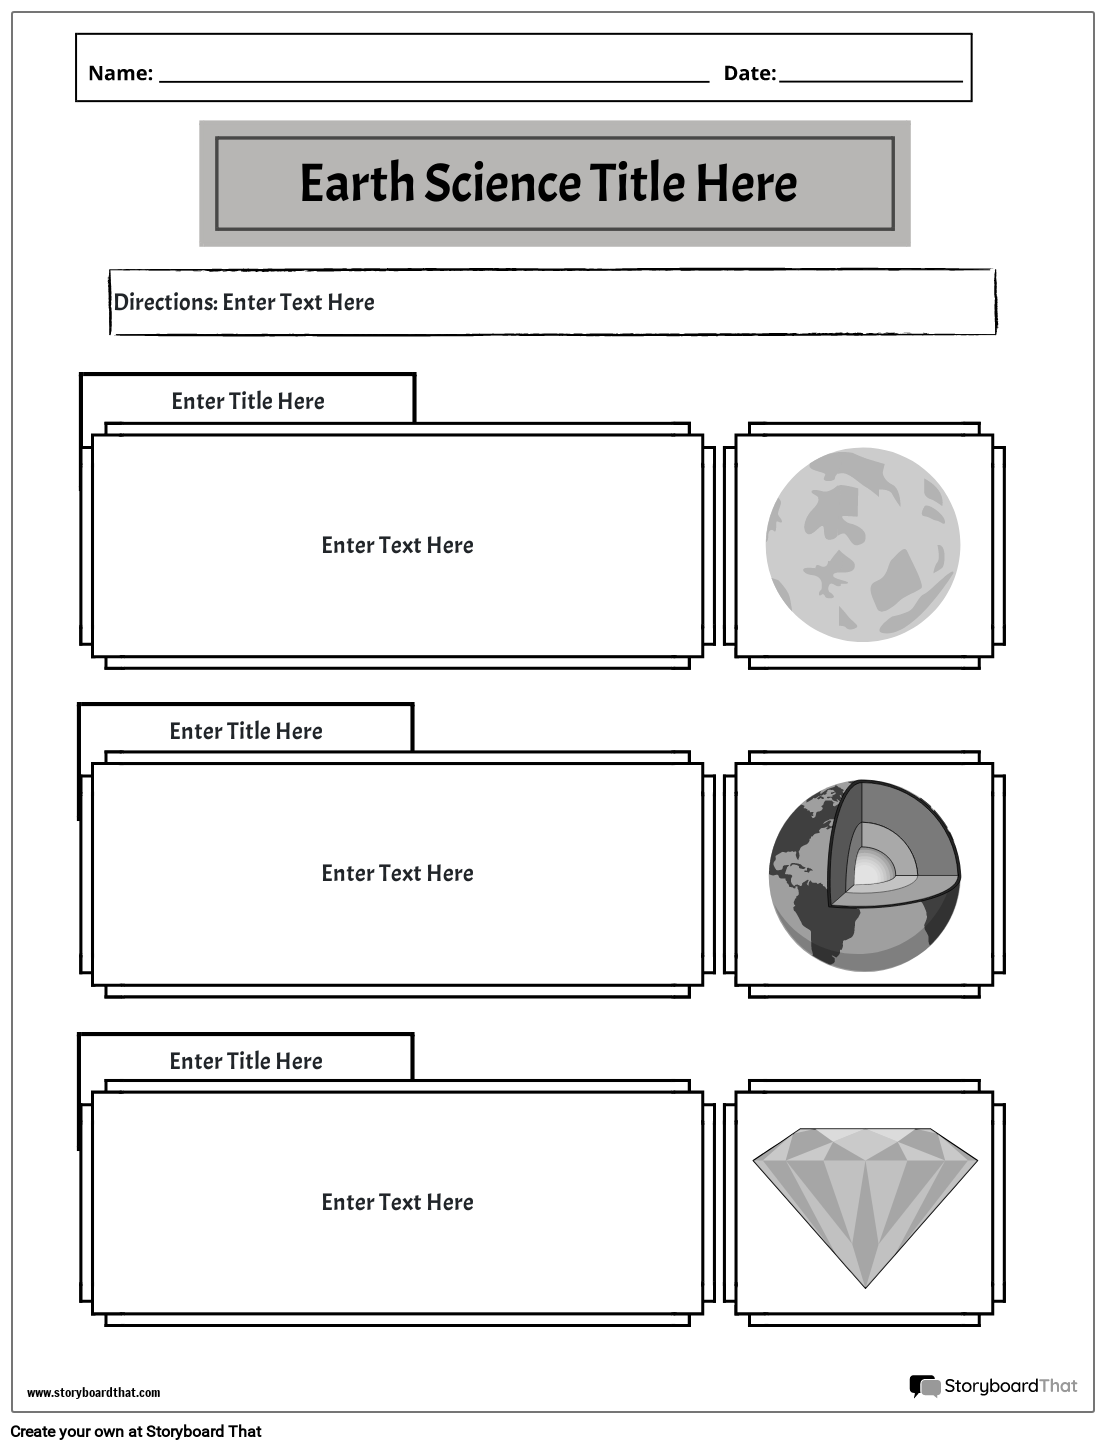 Template for earth science - black and white